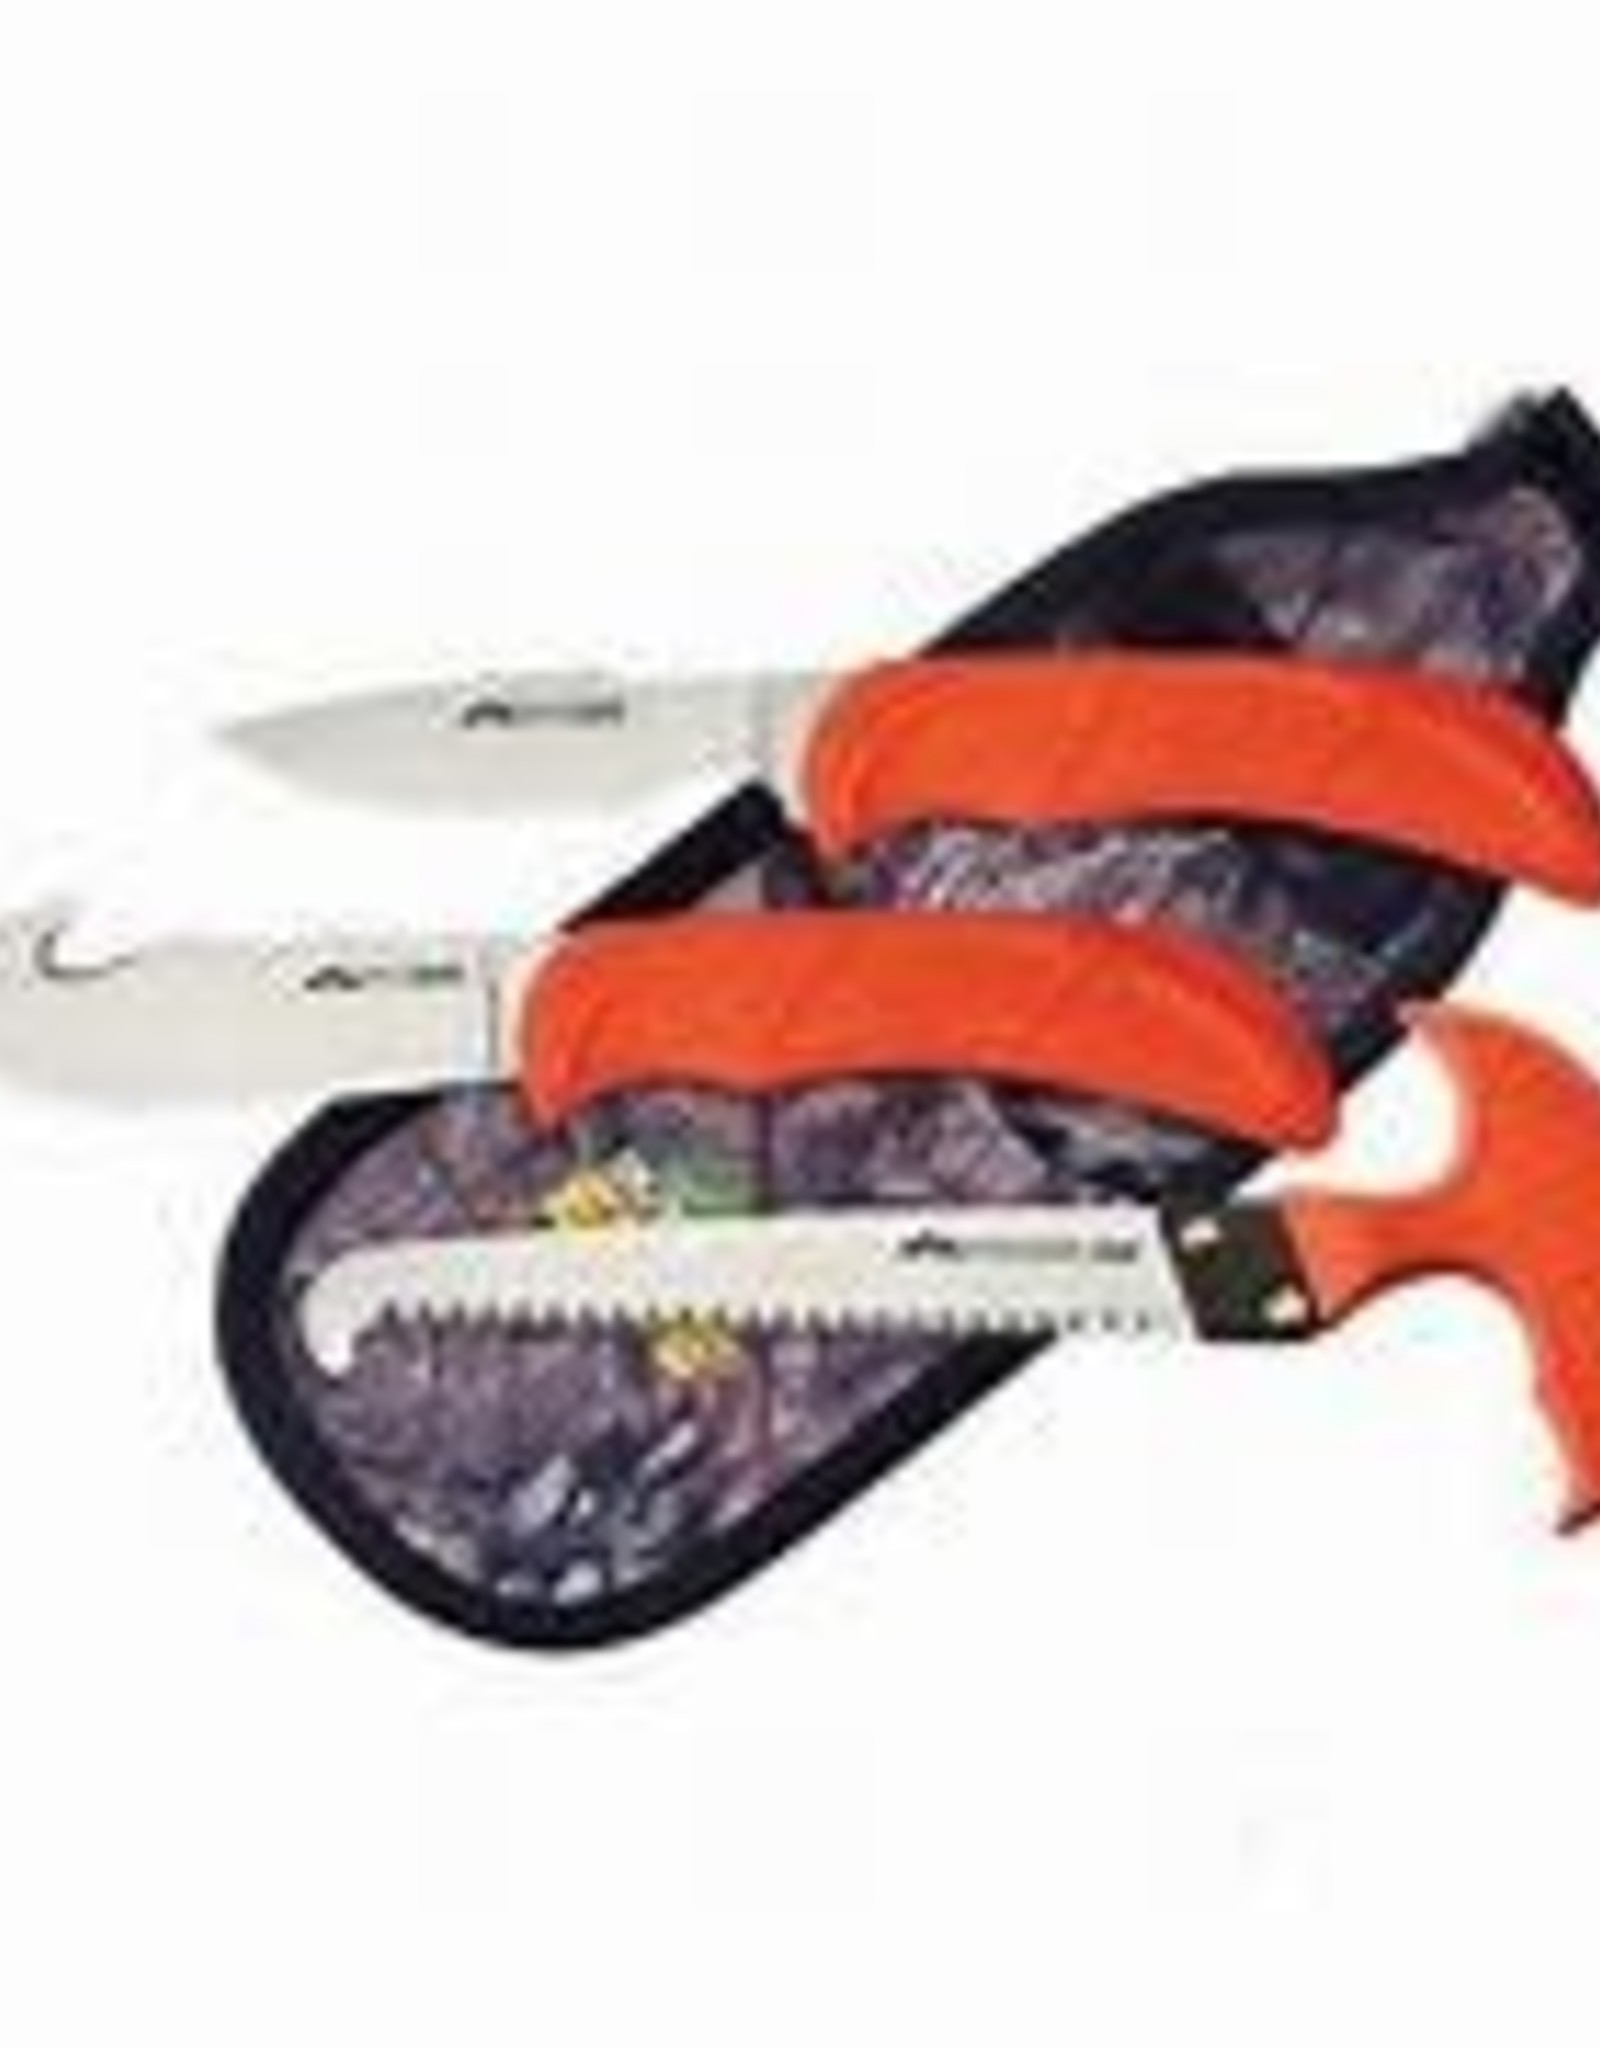 Outdoor Edge Wild Guide Four-Piece Dressing Kit